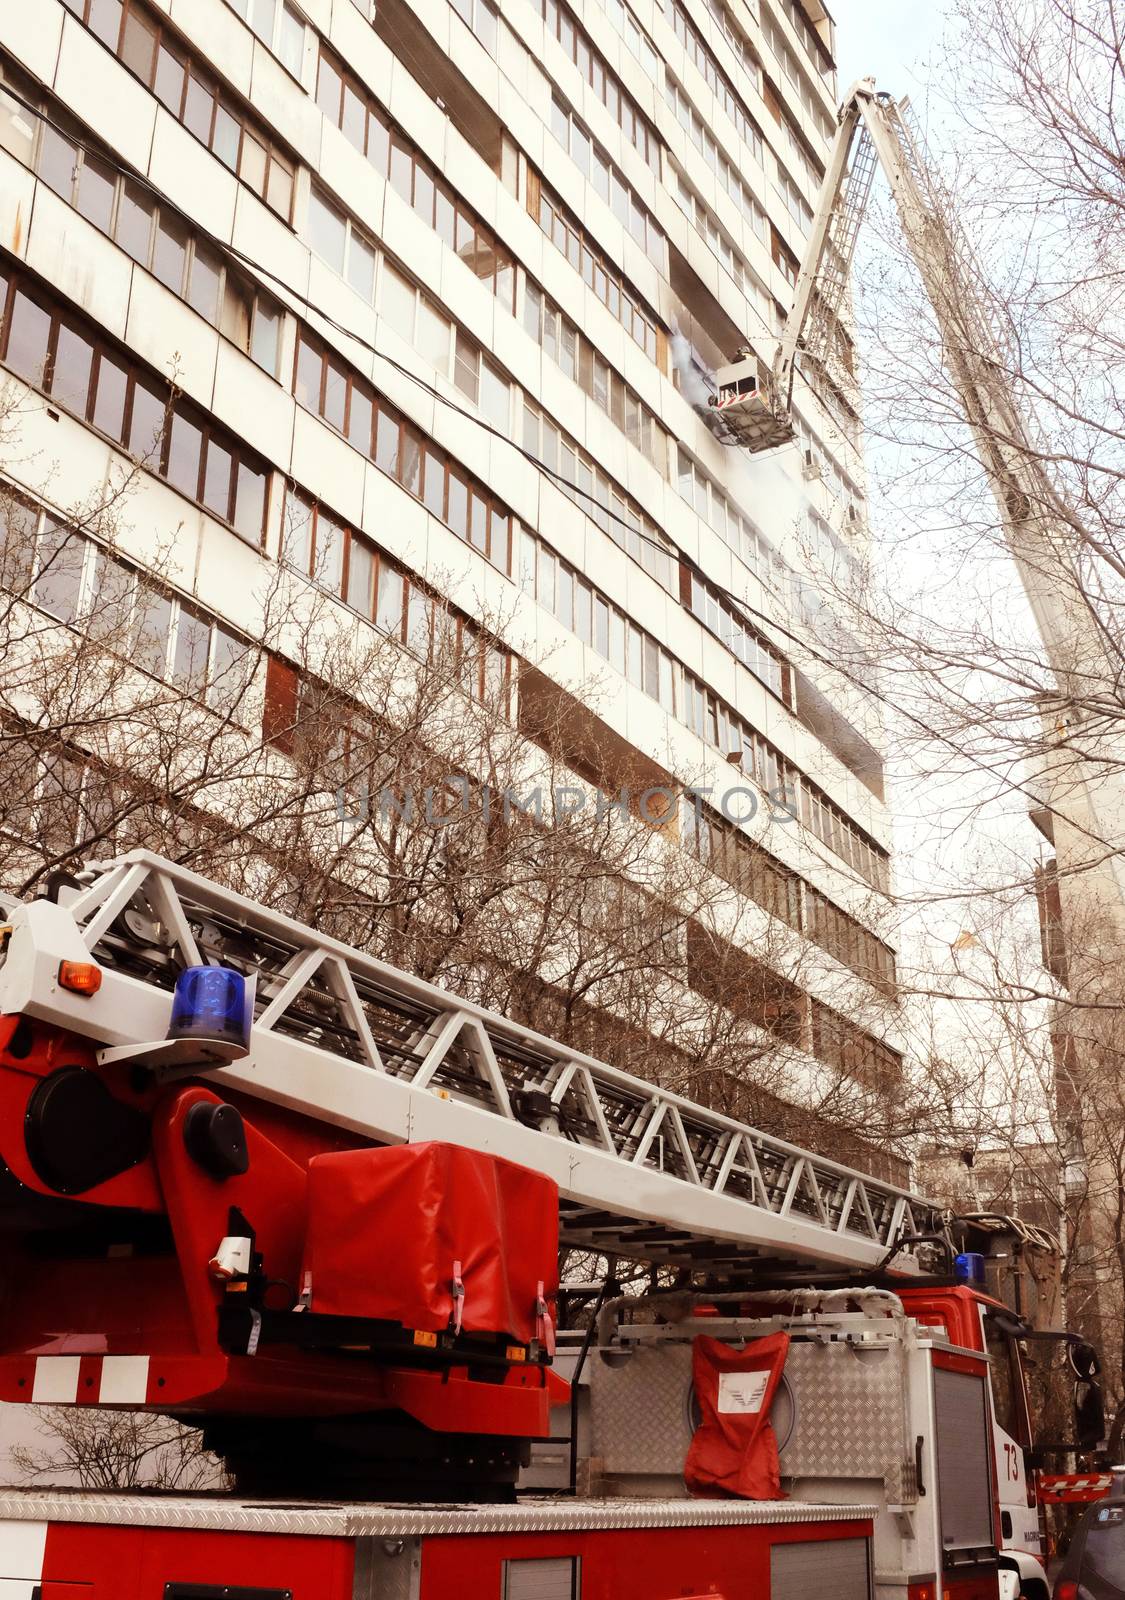 Fire in a multi-storey building by fifg